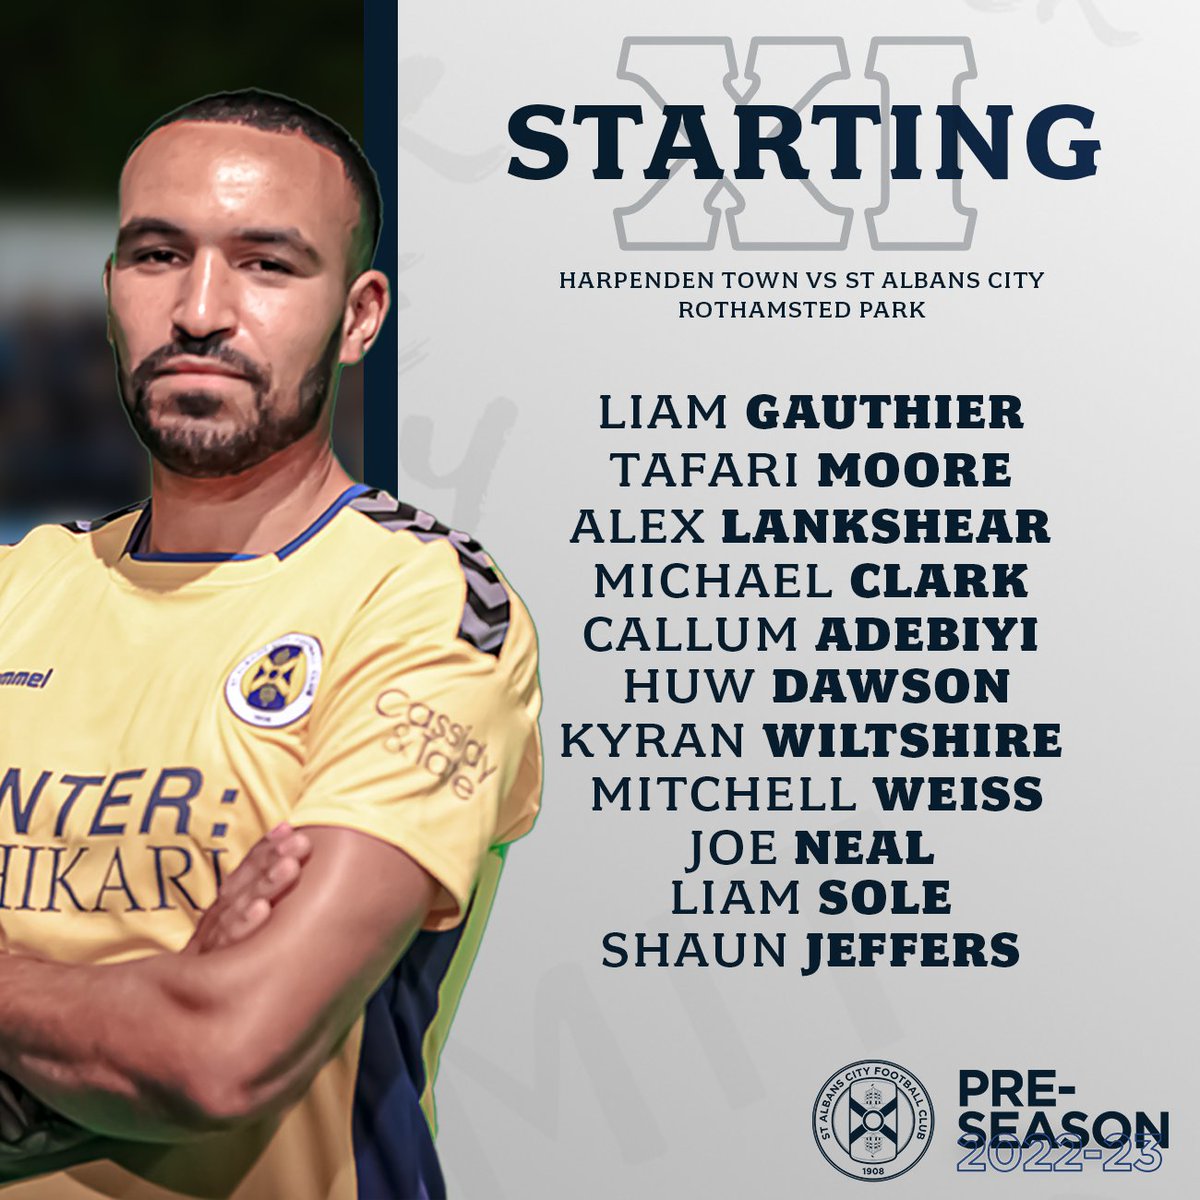 👤 STARTING XI 👉 Here's how we line-up to face @Harpenden_Town to kick off our pre-season #SACFC 😇